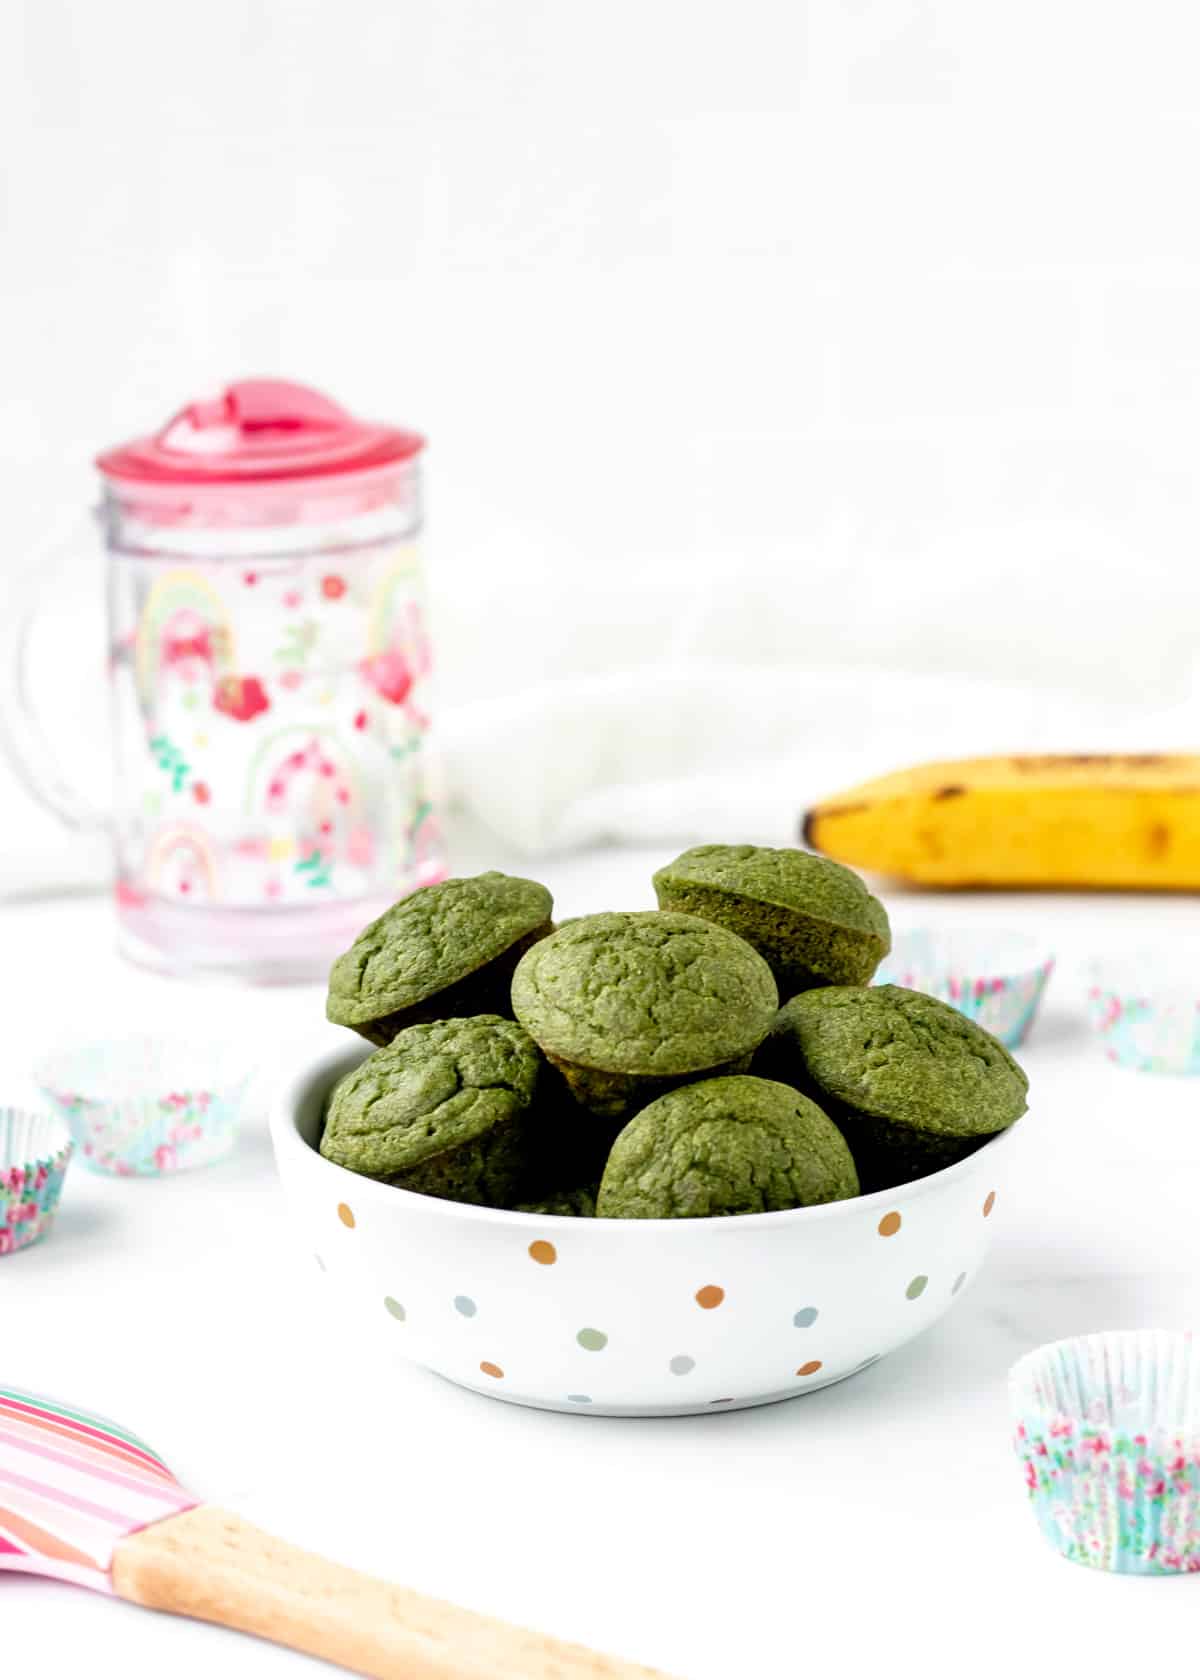 A polka dot bowl filled with mini green monster muffins.